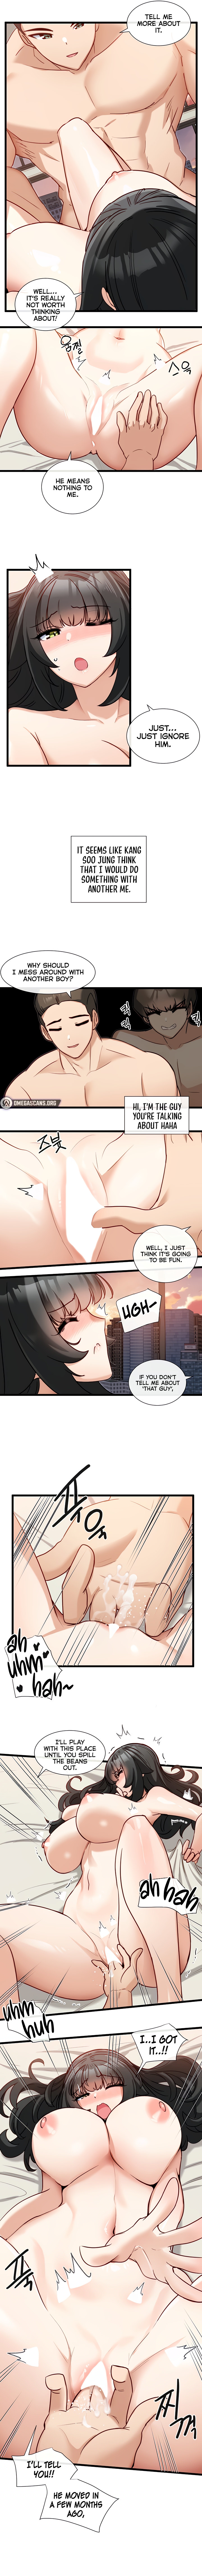 Heroine App - Chapter 16 Page 3